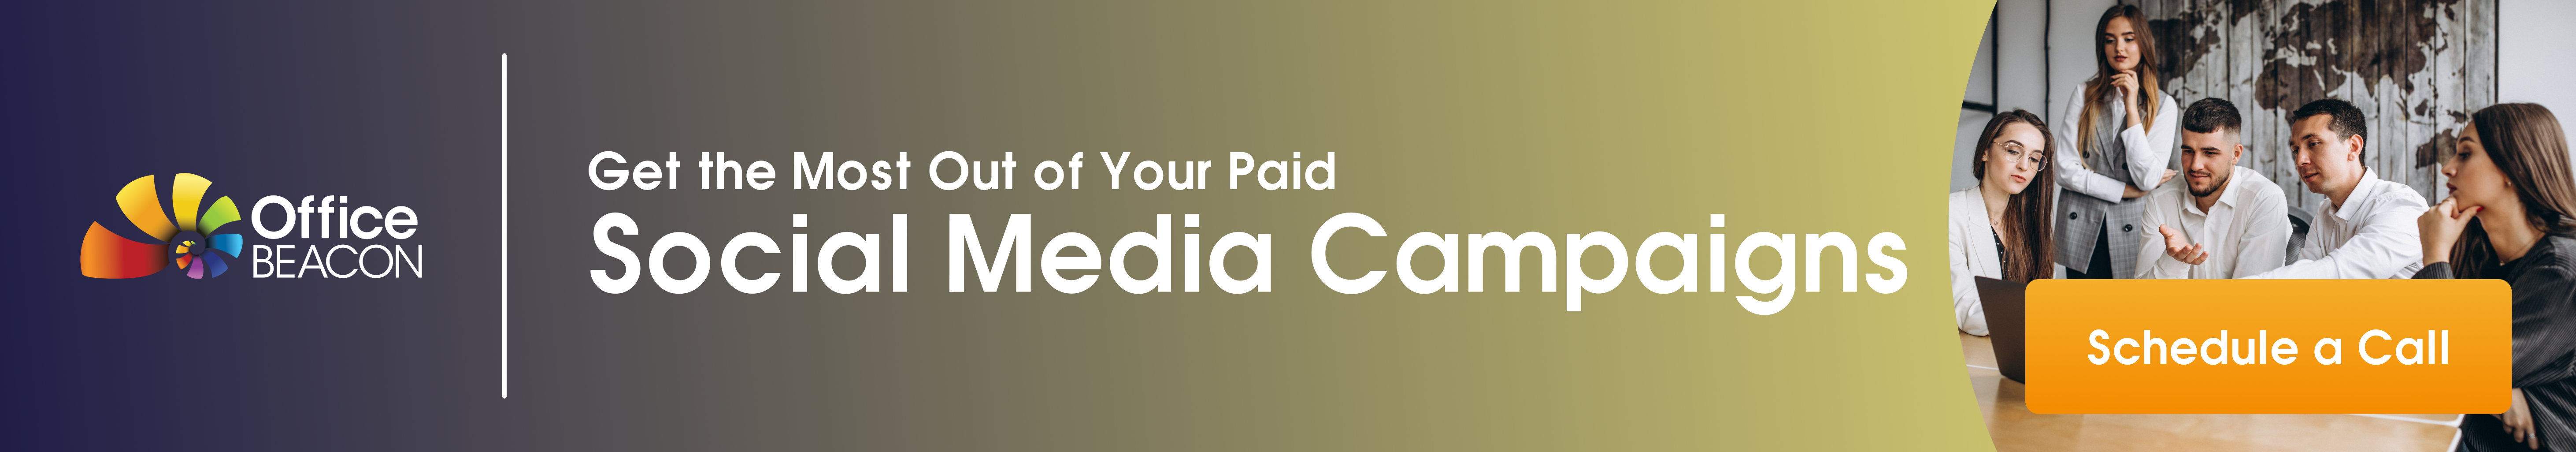 Get most of your paid social media campaigns